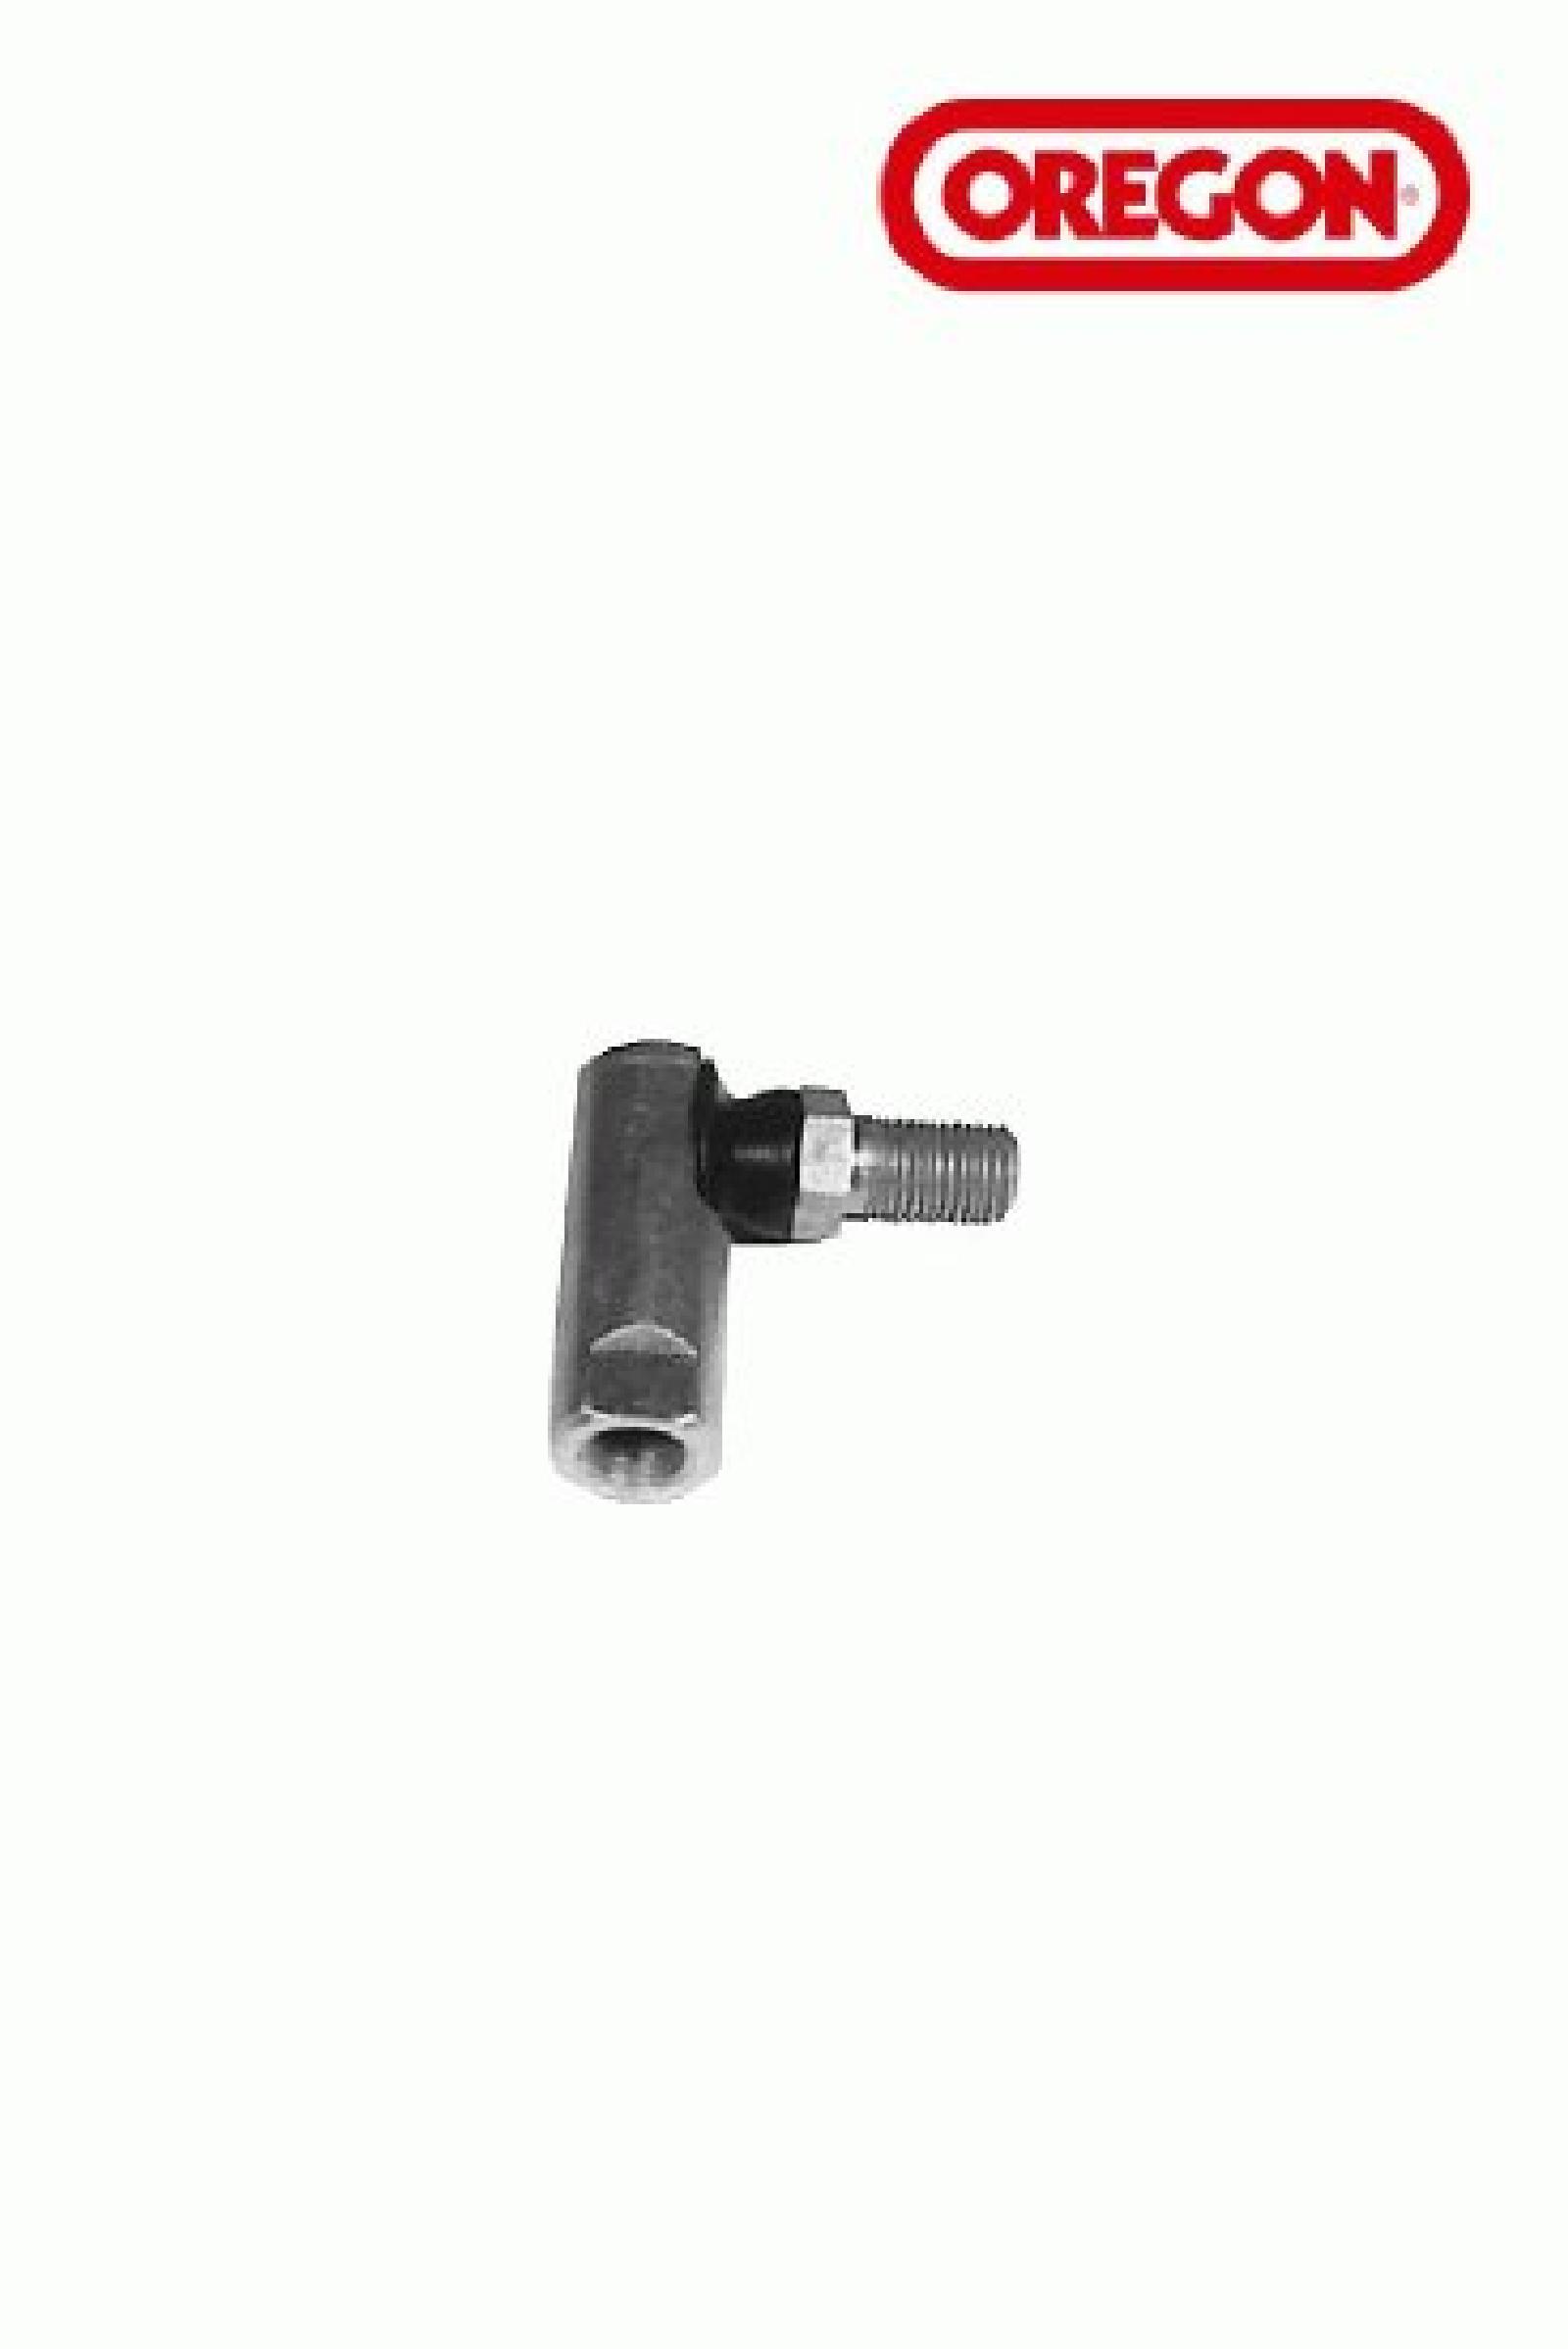 BALL JOINT 3/8 24 SPECIAL part# 45-111 by Oregon